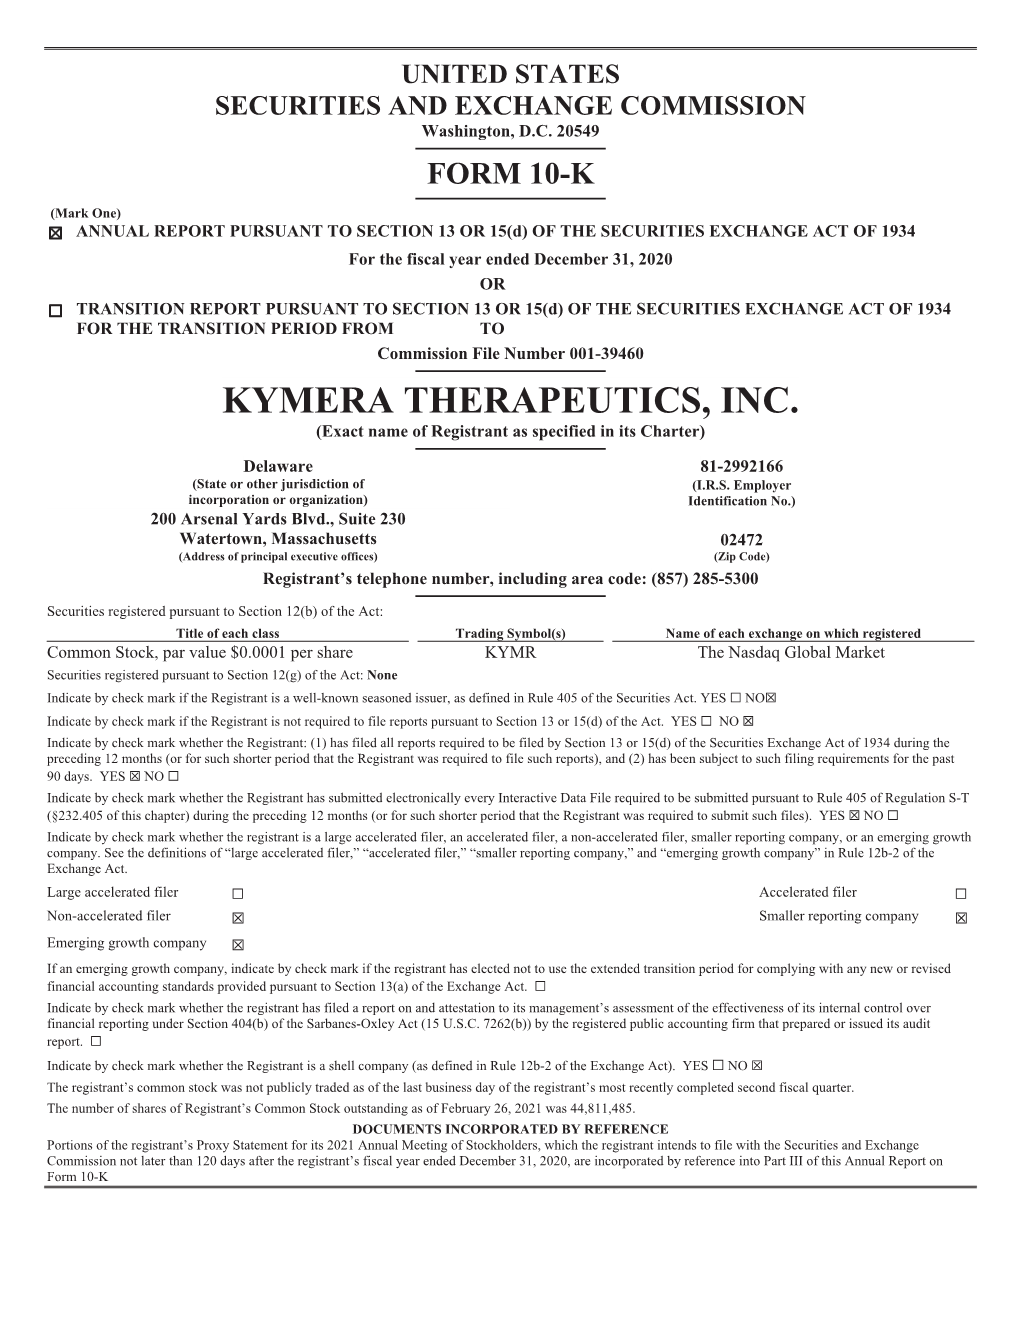 KYMERA THERAPEUTICS, INC. (Exact Name of Registrant As Specified in Its Charter)